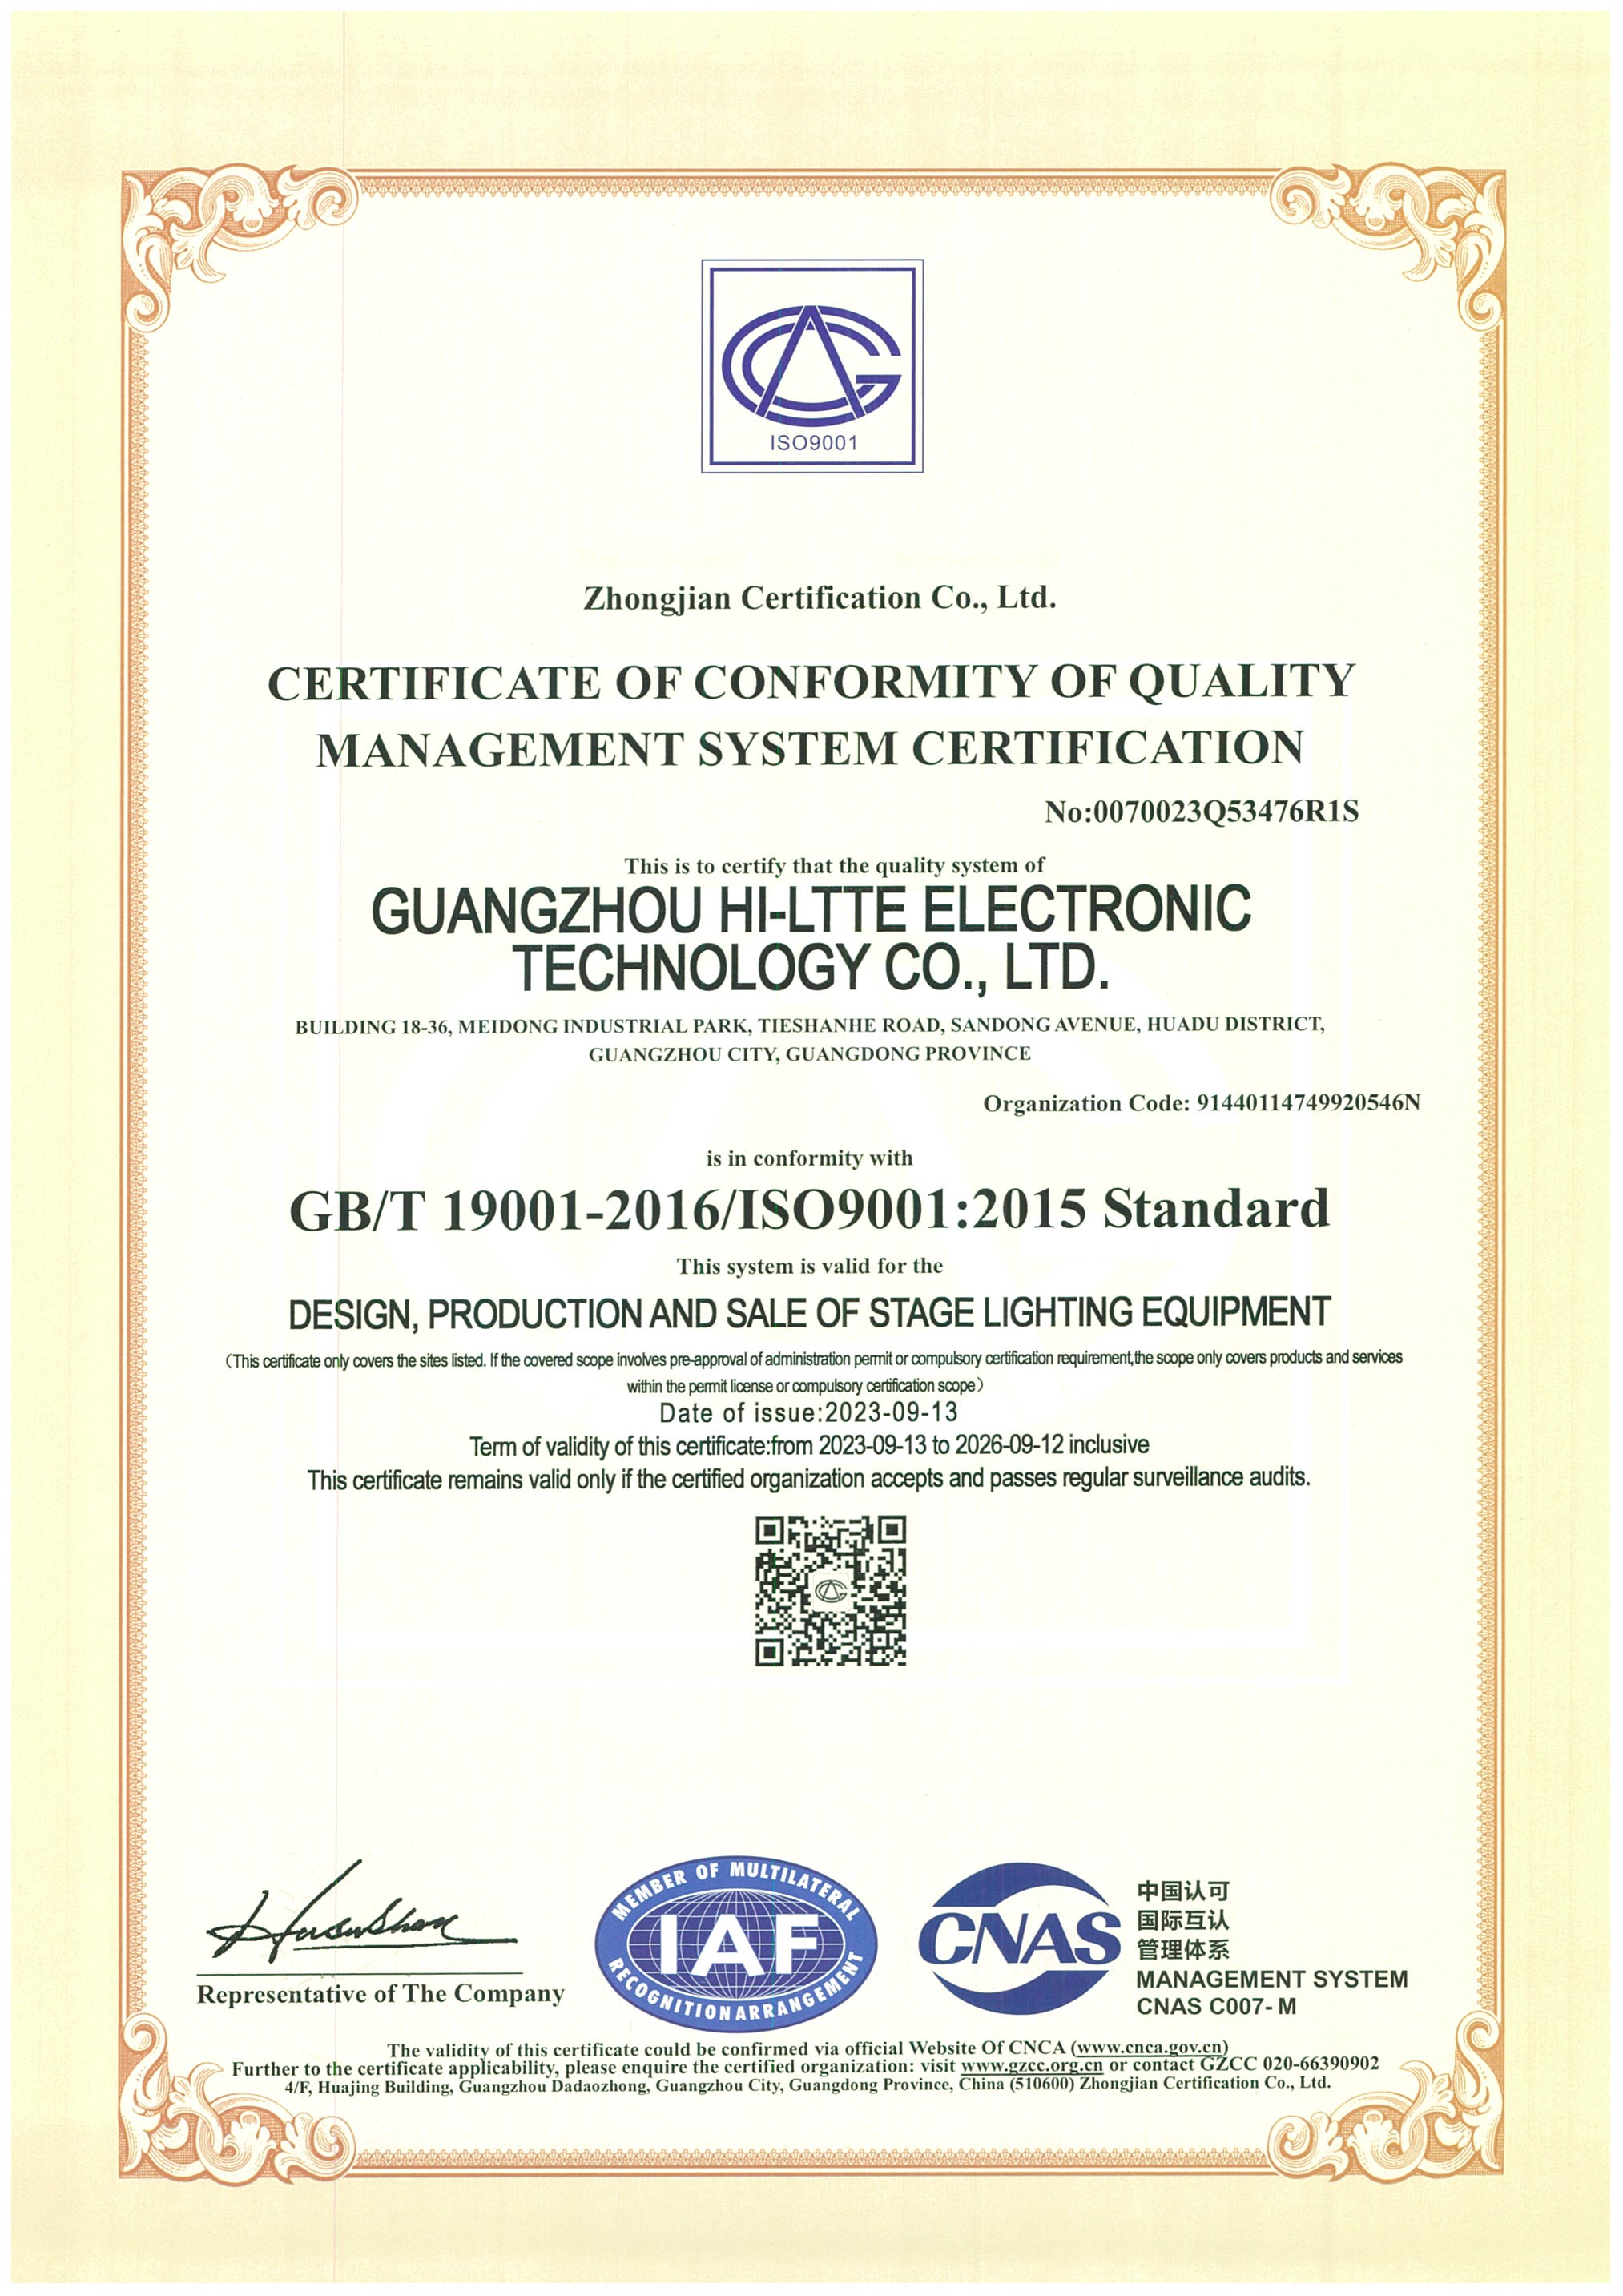 CERTIFICATE OF CONFORMITY OF QUALITYMANAGEMENT SYSTEM CERTIFICATION